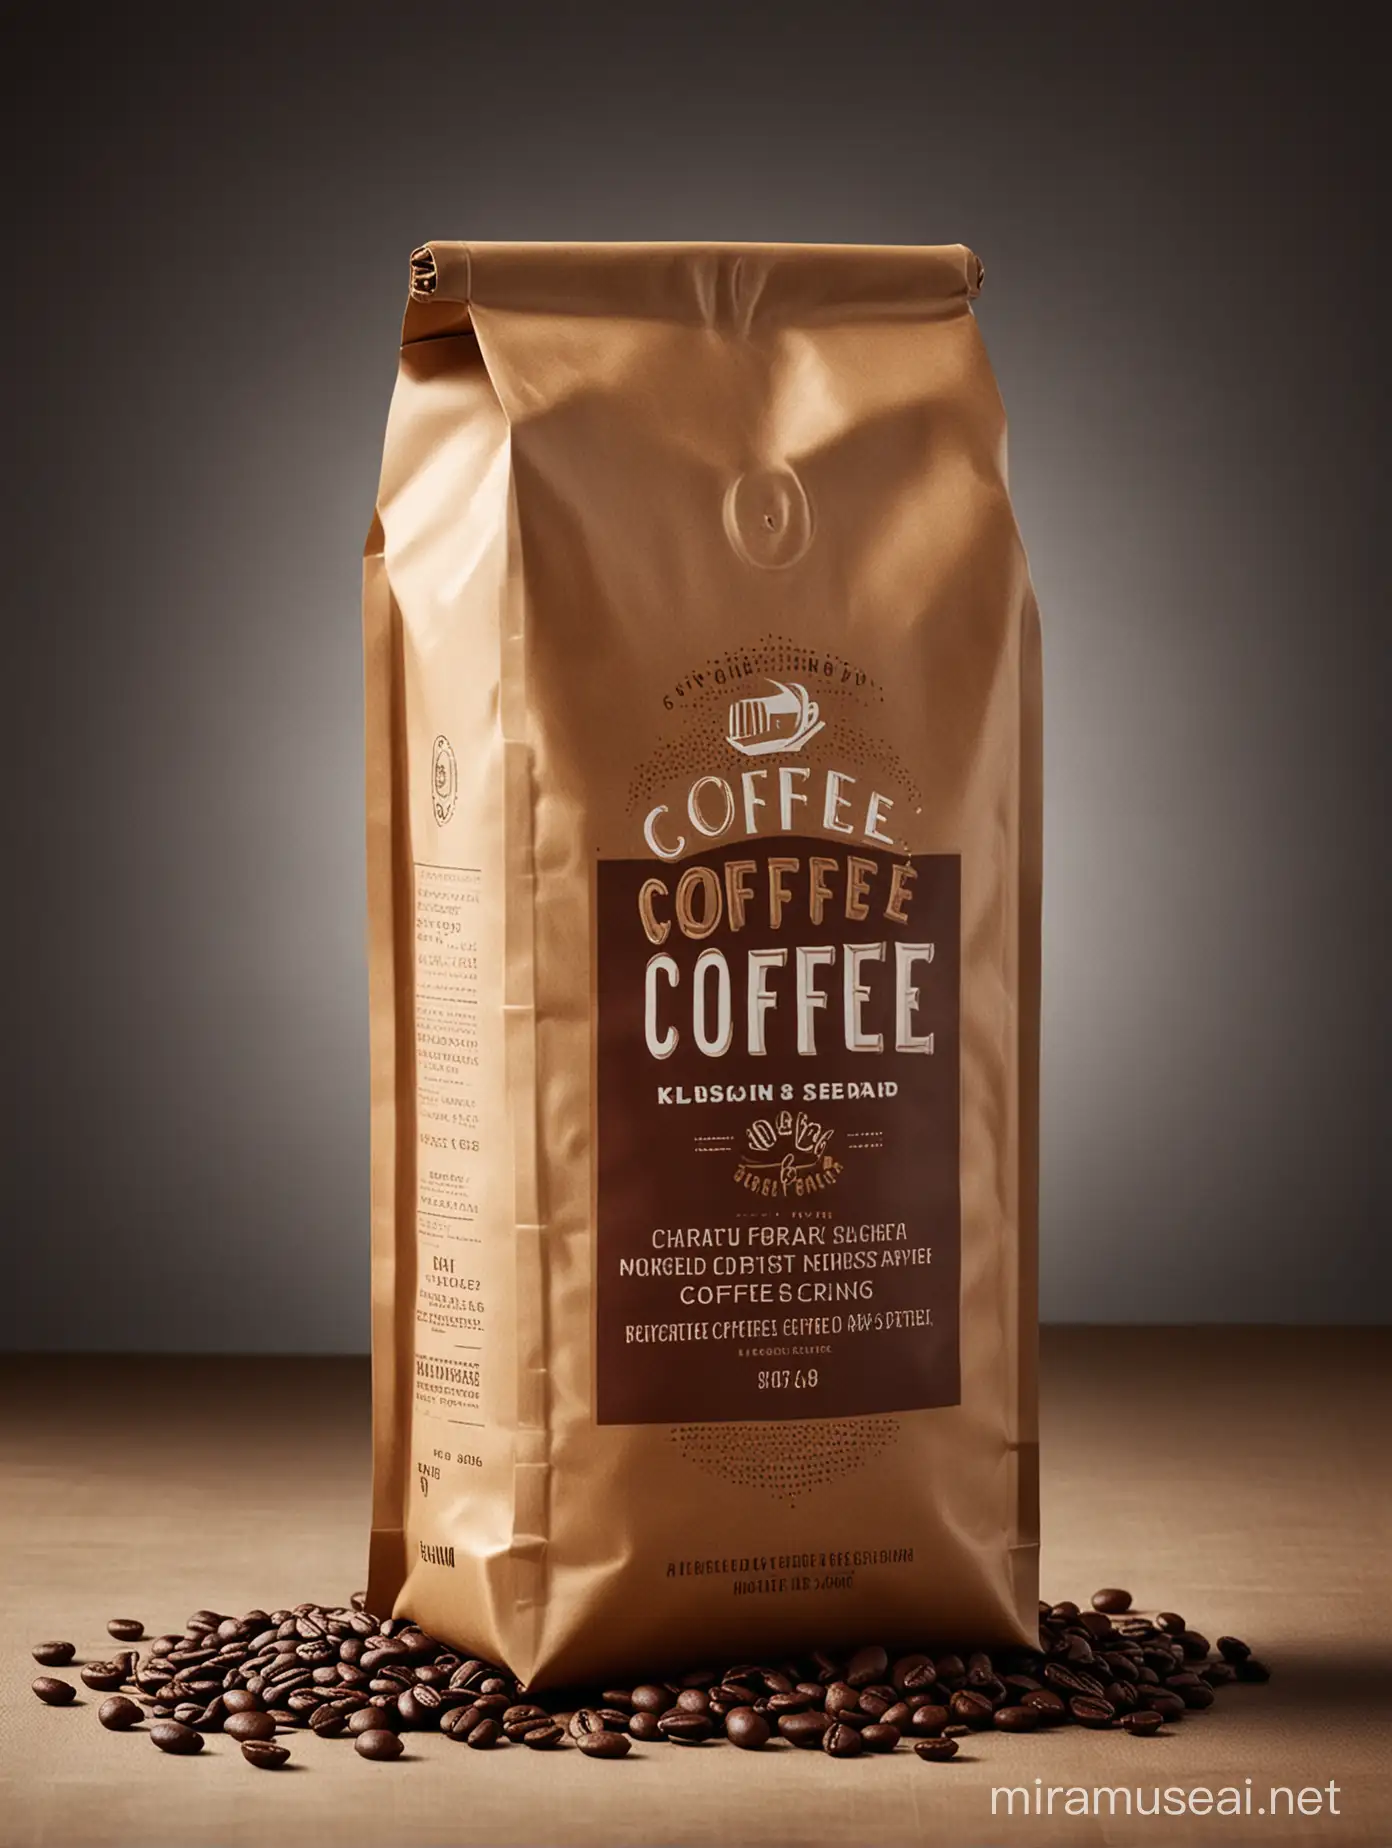 Studio Product Photography Packaged Coffee with Graphic Design